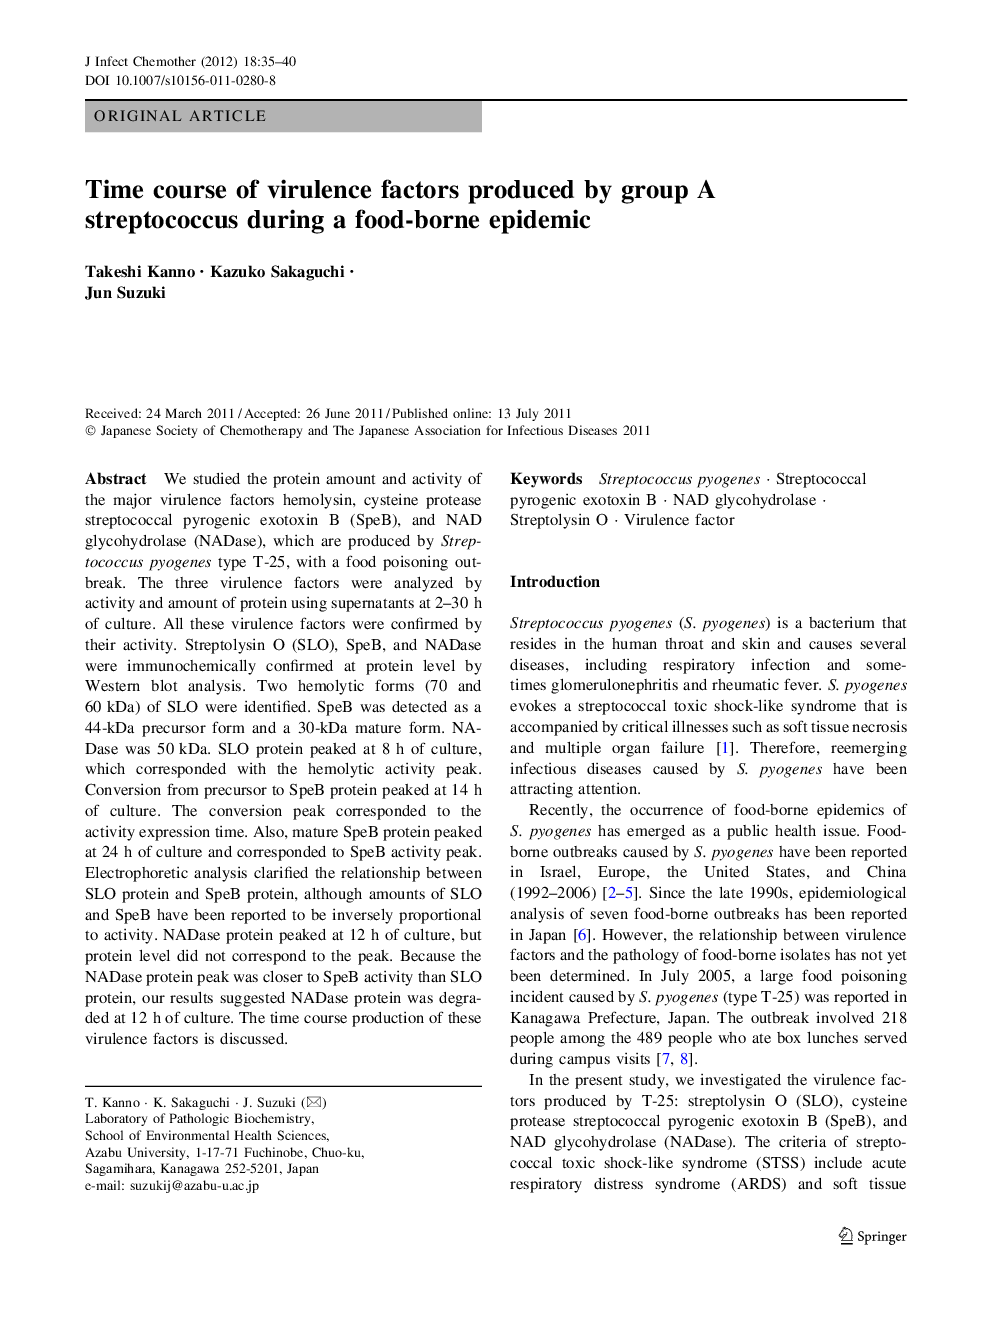 Time course of virulence factors produced by group A streptococcus during a food-borne epidemic